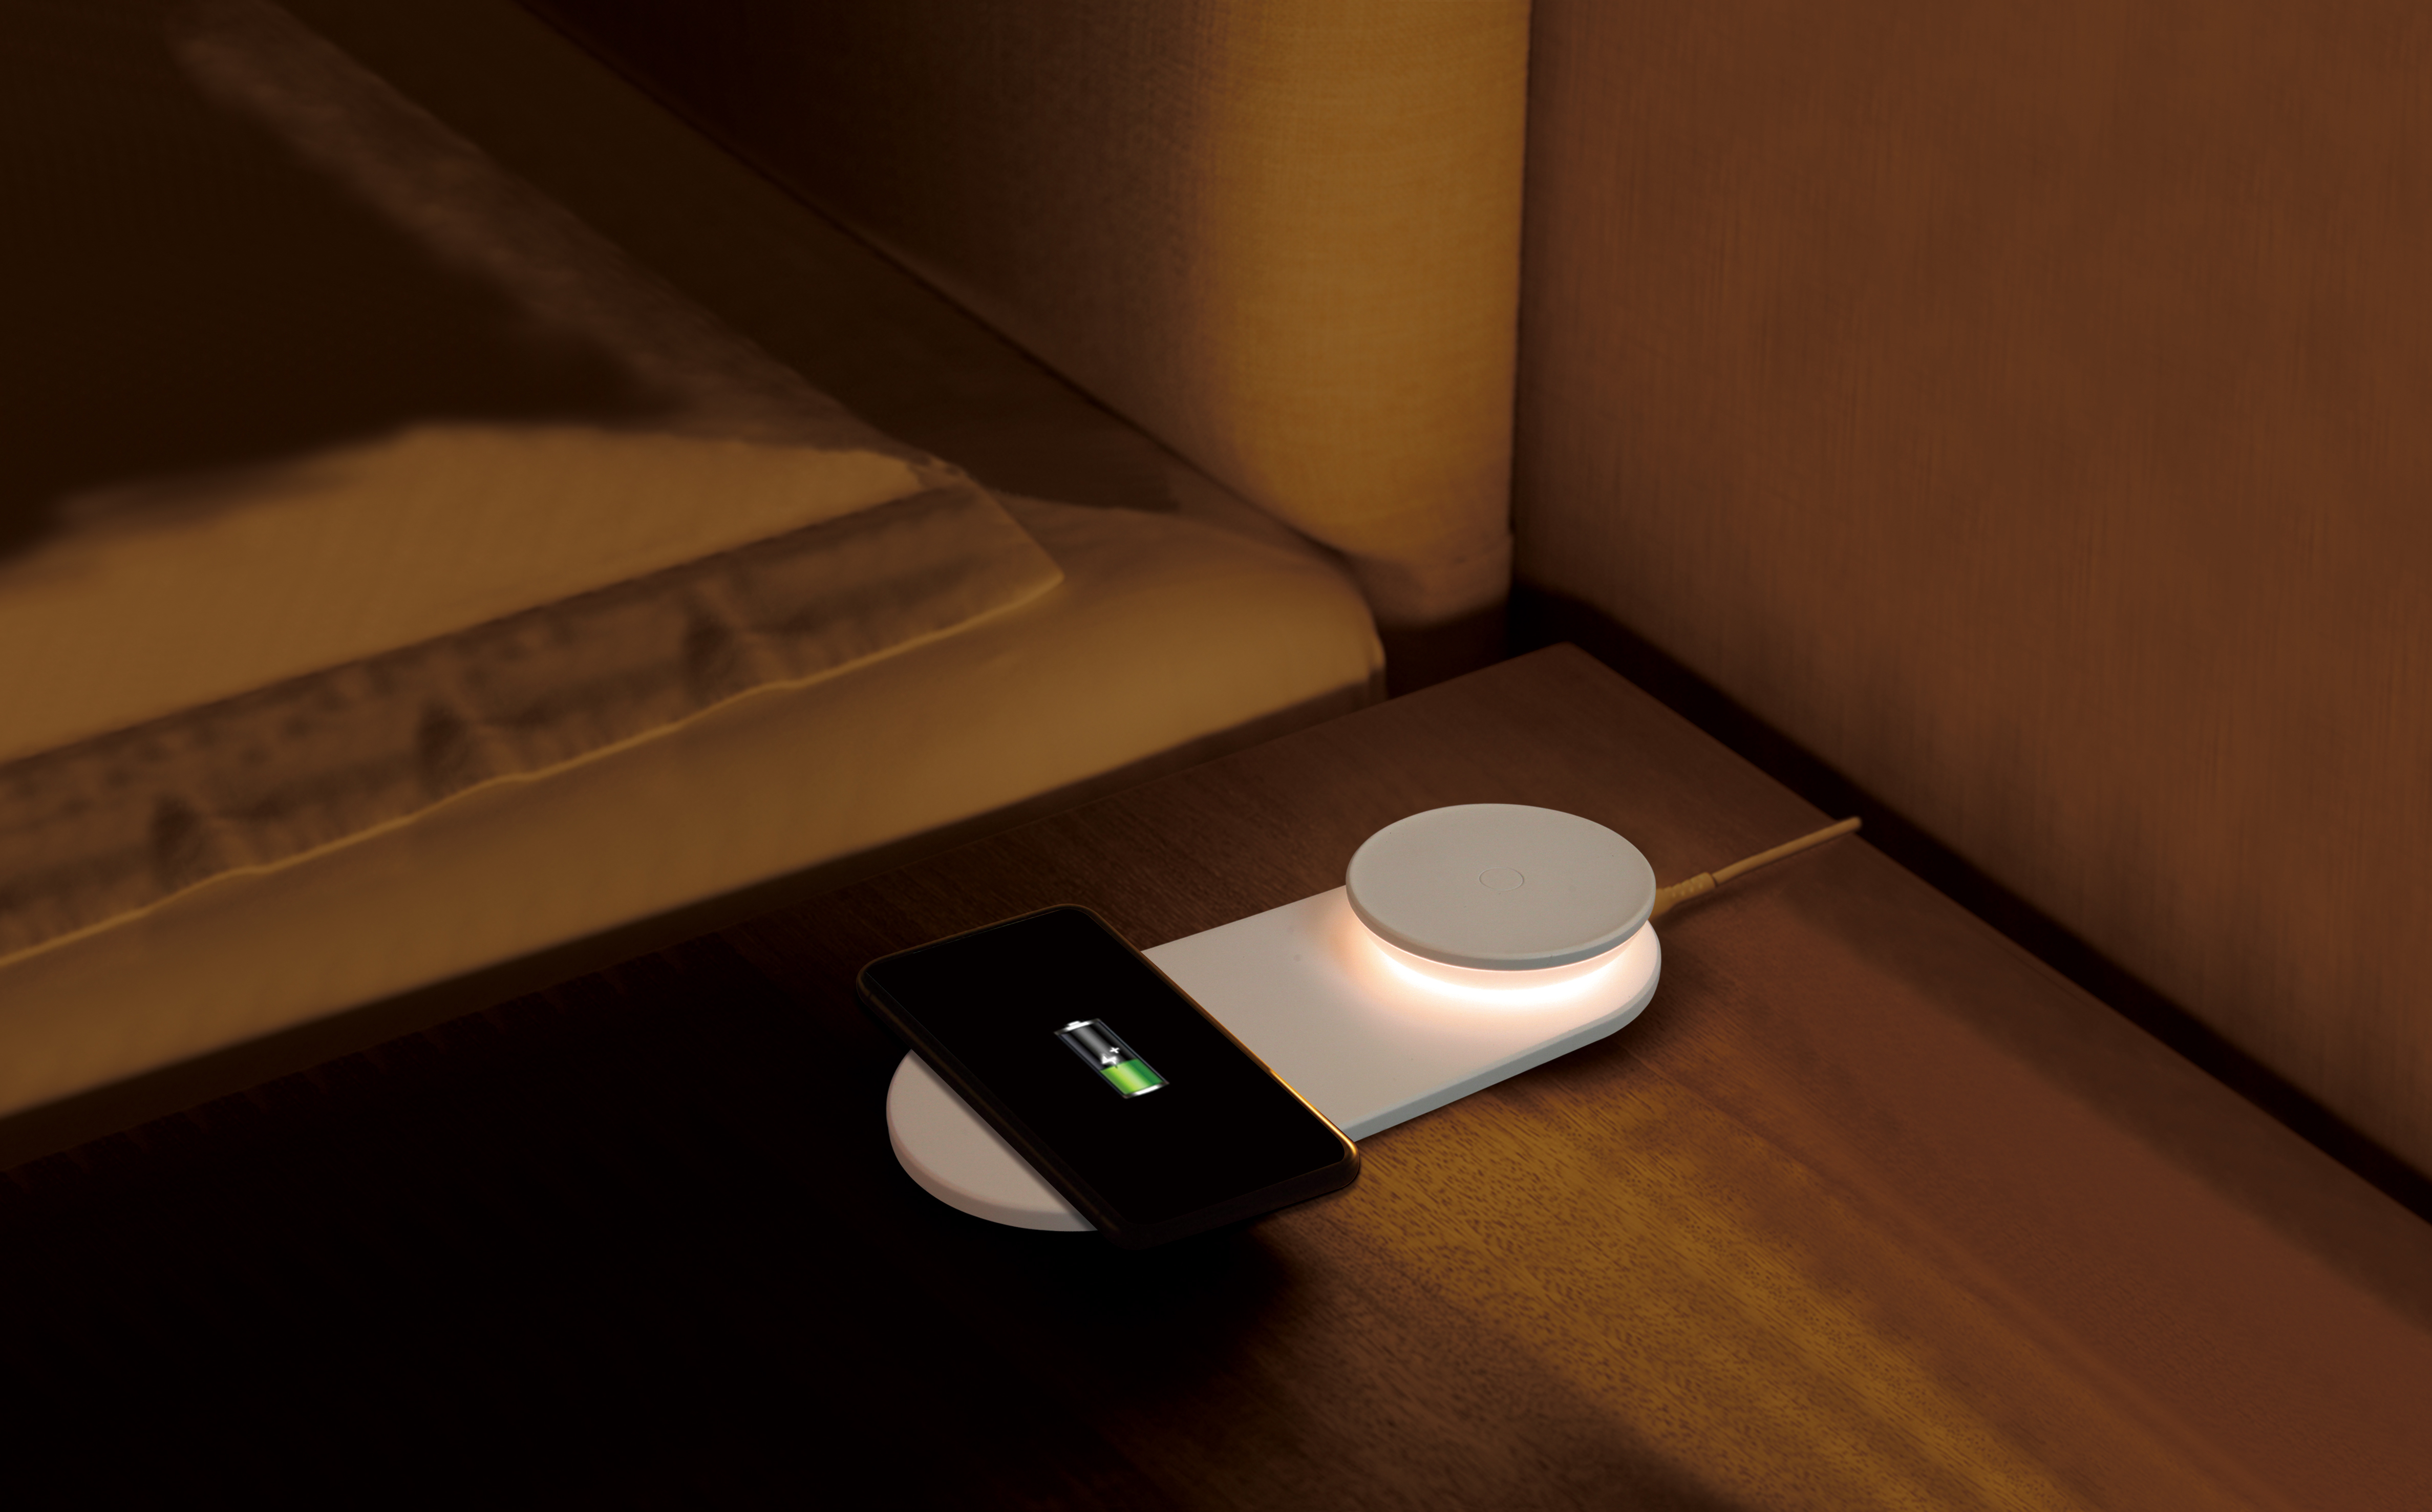 Halo Wireless Charging Pad with Bedside Lamp